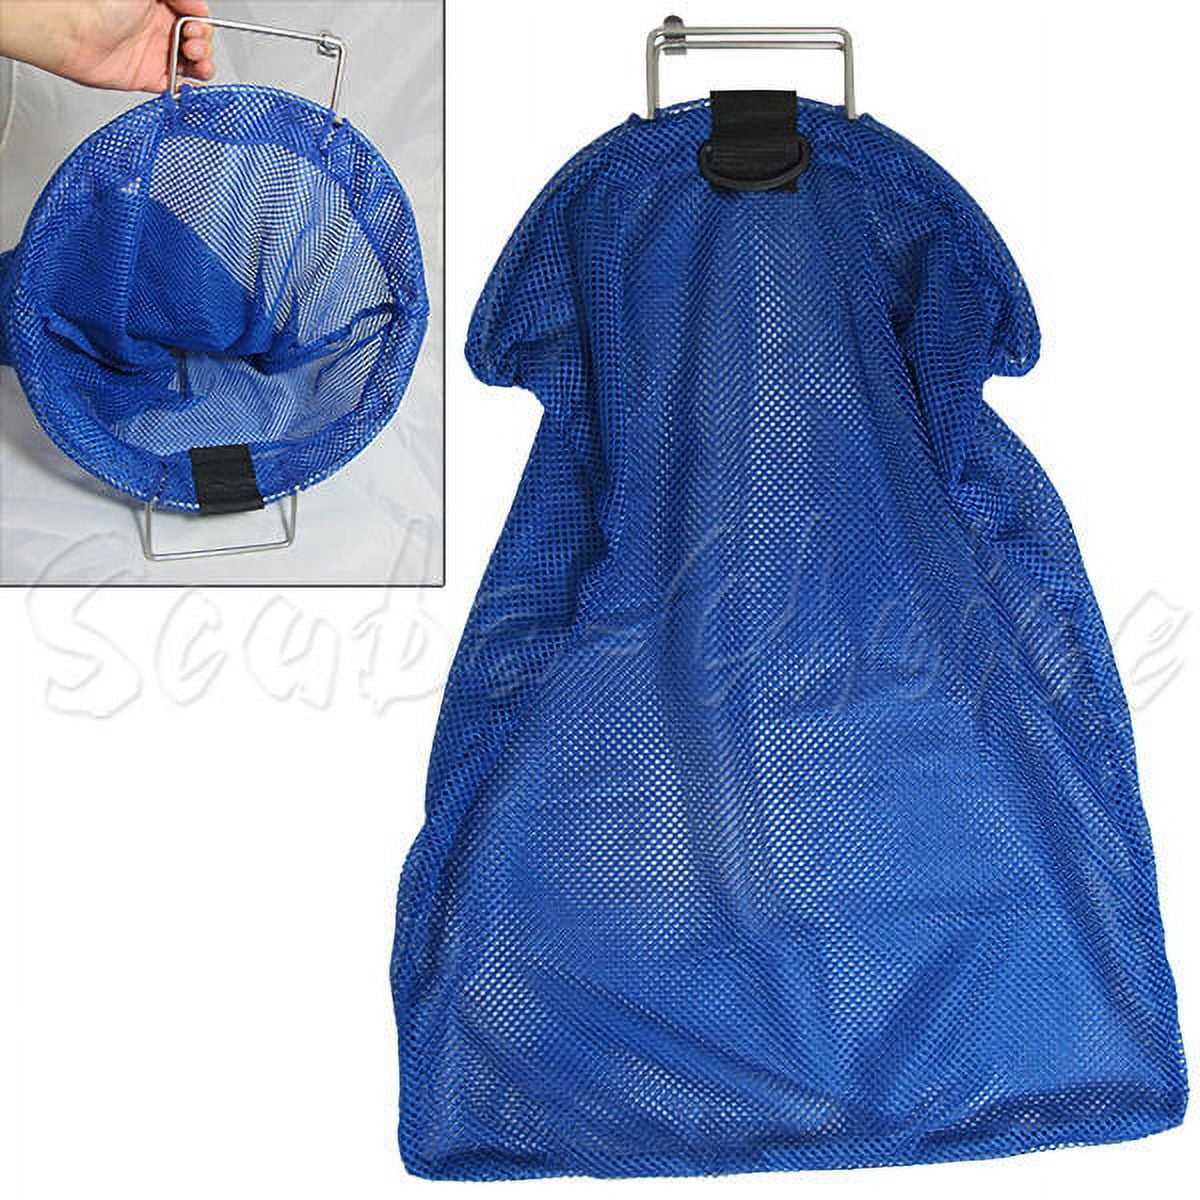 Spearfishing 5mm Stainless Steel Wire Handle Blue Fish Bag Net